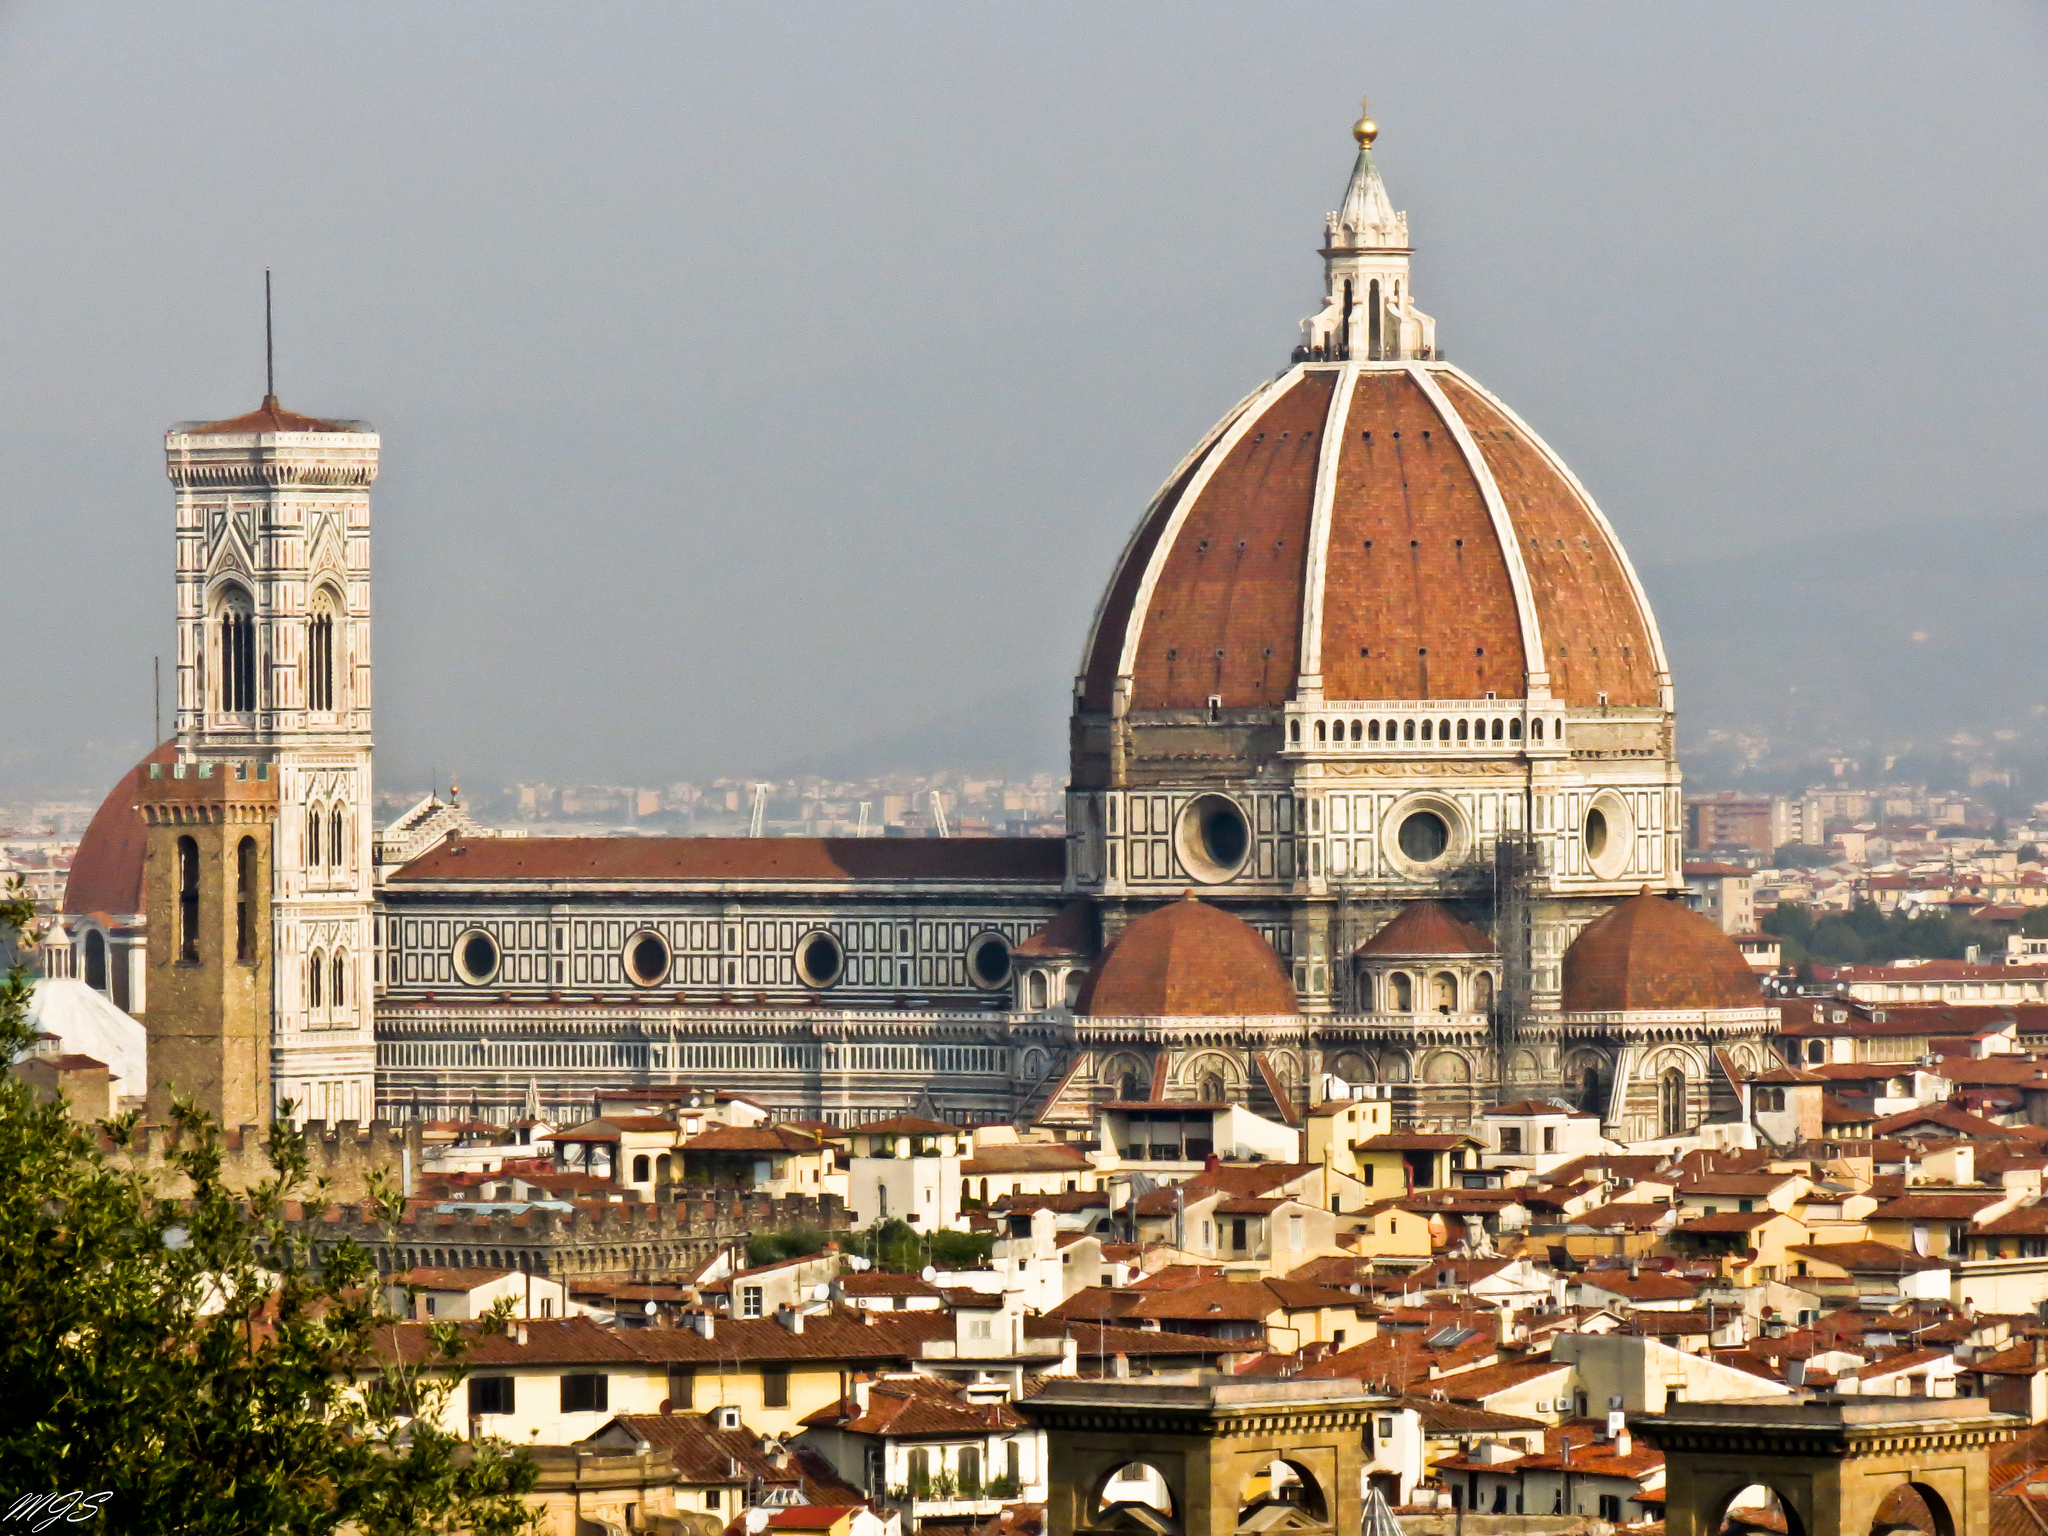 Florence's Duomo | Photo by Mark Smith on Flickr